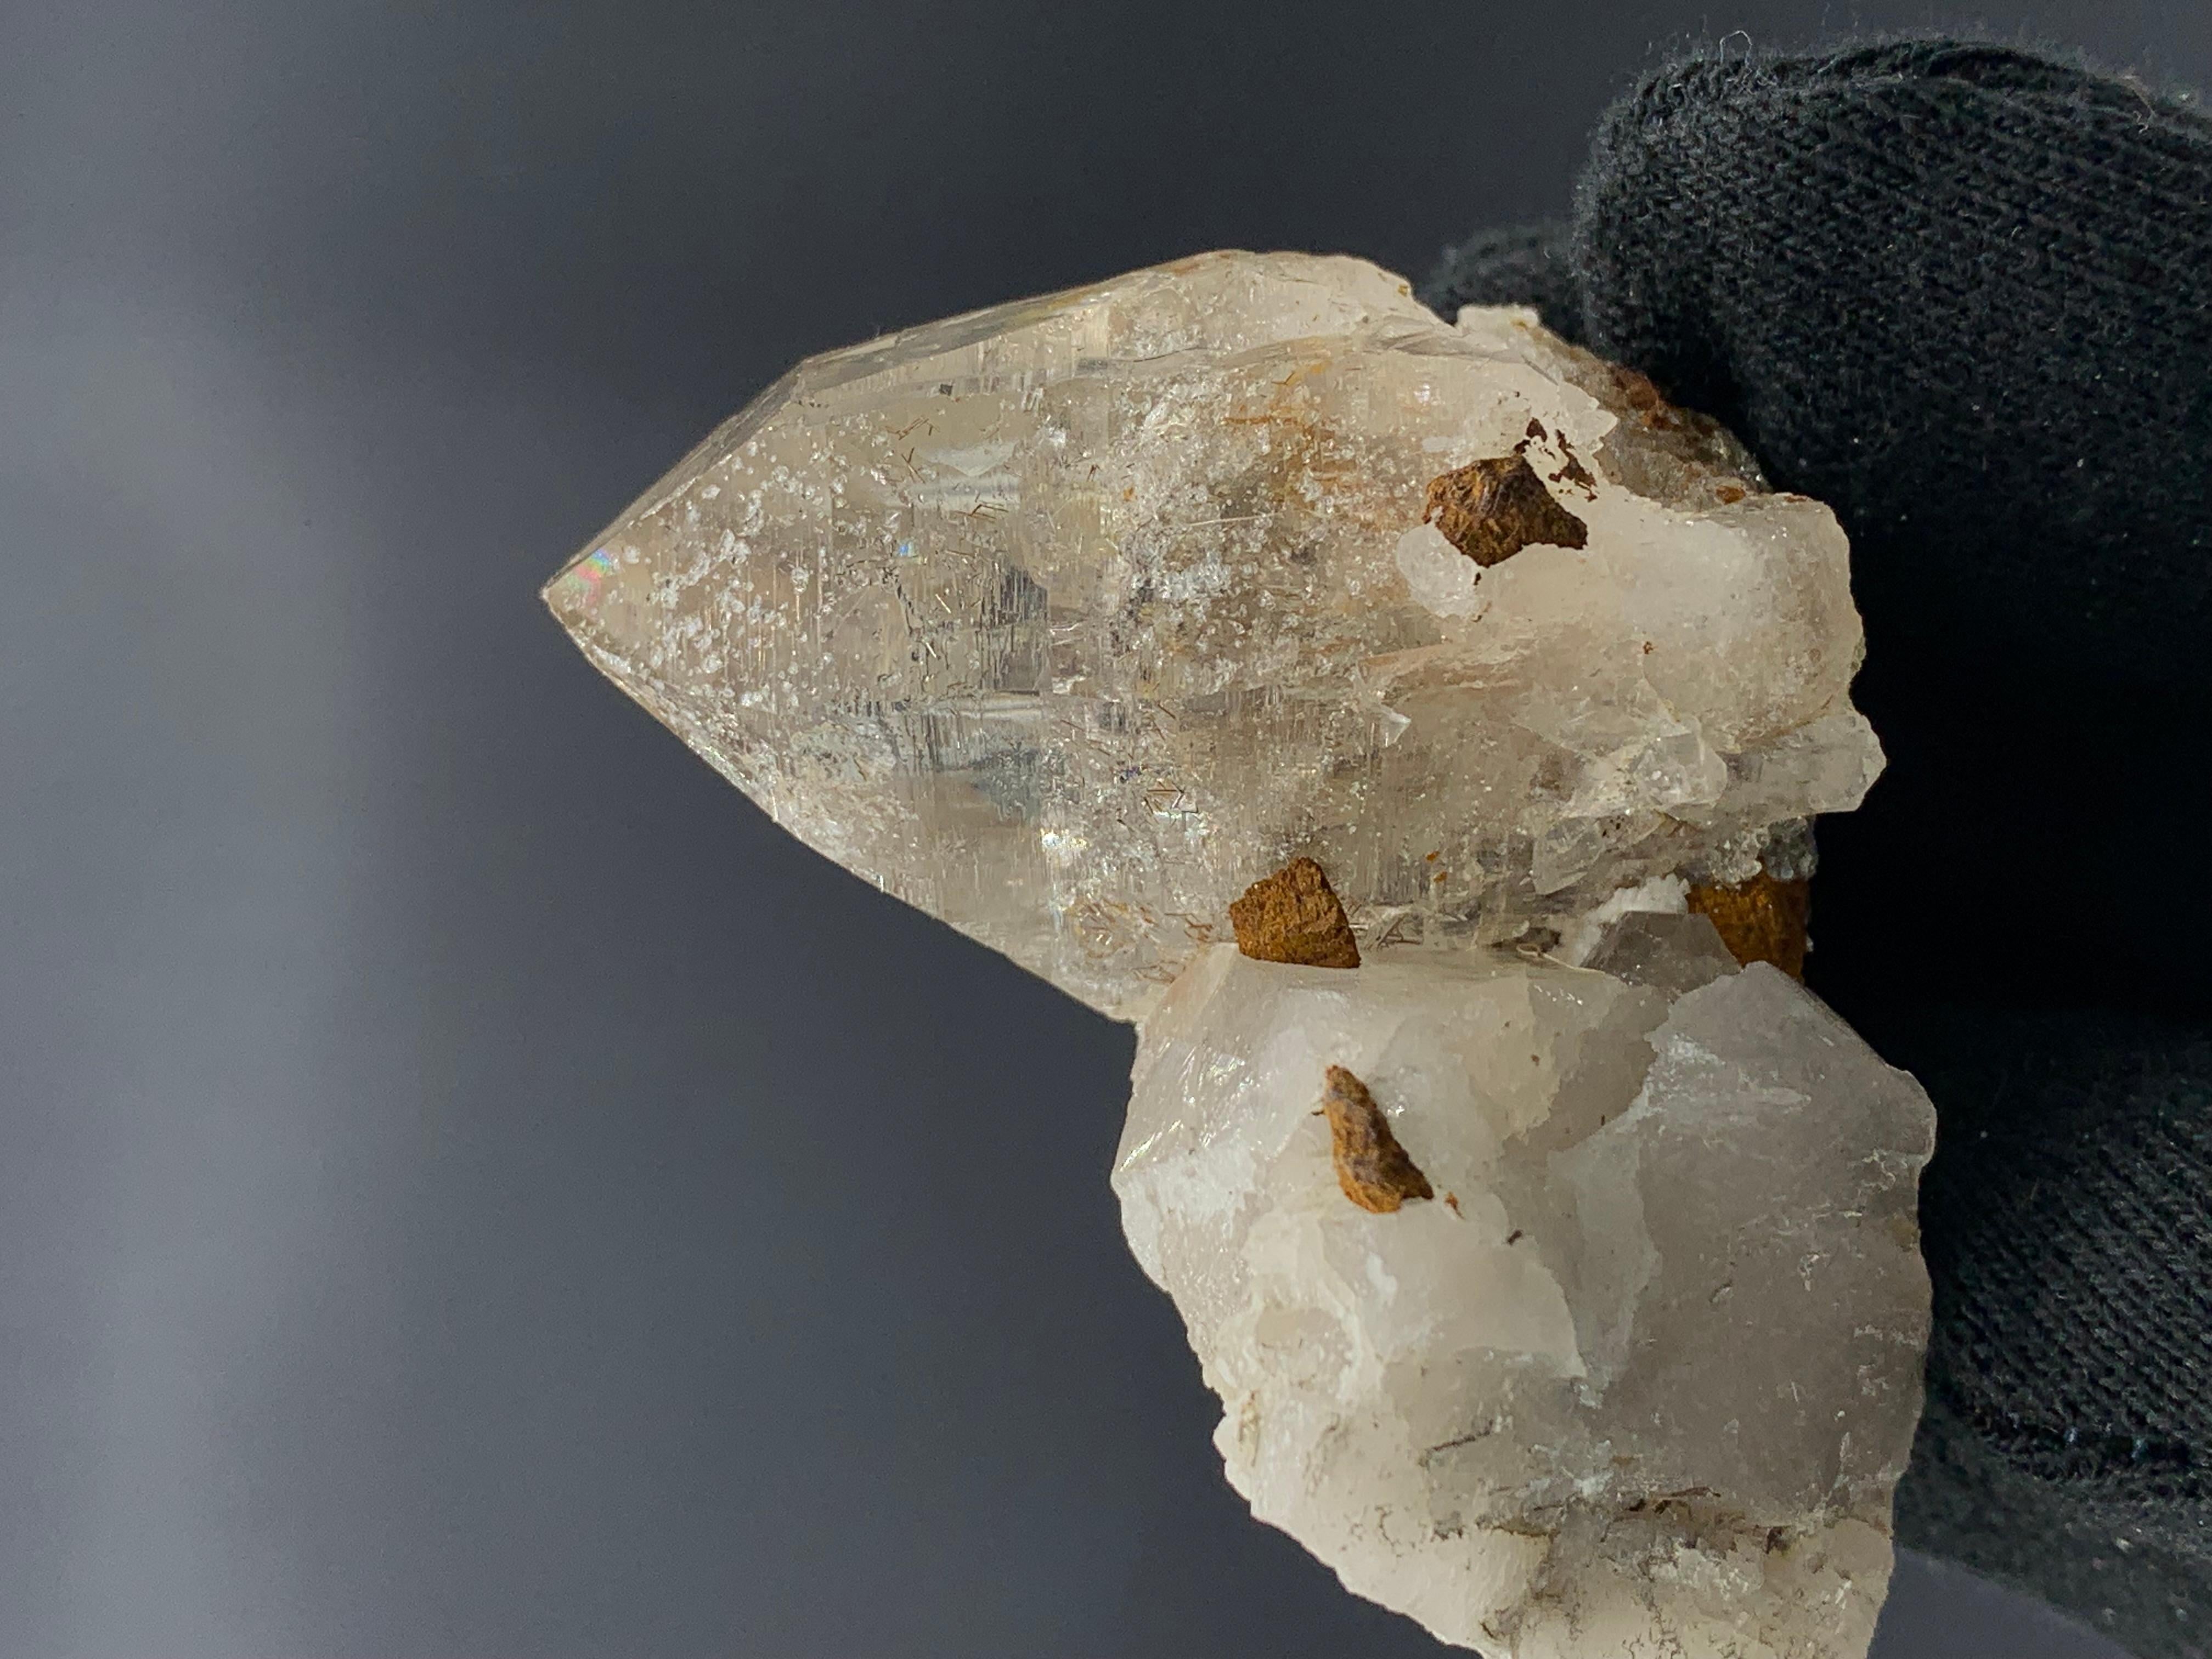 84.04 Gram Gorgeous Quartz Specimen From Balochistan, Pakistan
Weight: 84.04 Gram 
Dimension: 4.8 x 6 x 3.7 Cm
Origin : Balochistan, Pakistan
Quartz is a hard, crystalline mineral composed of silica (silicon dioxide). The atoms are linked in a